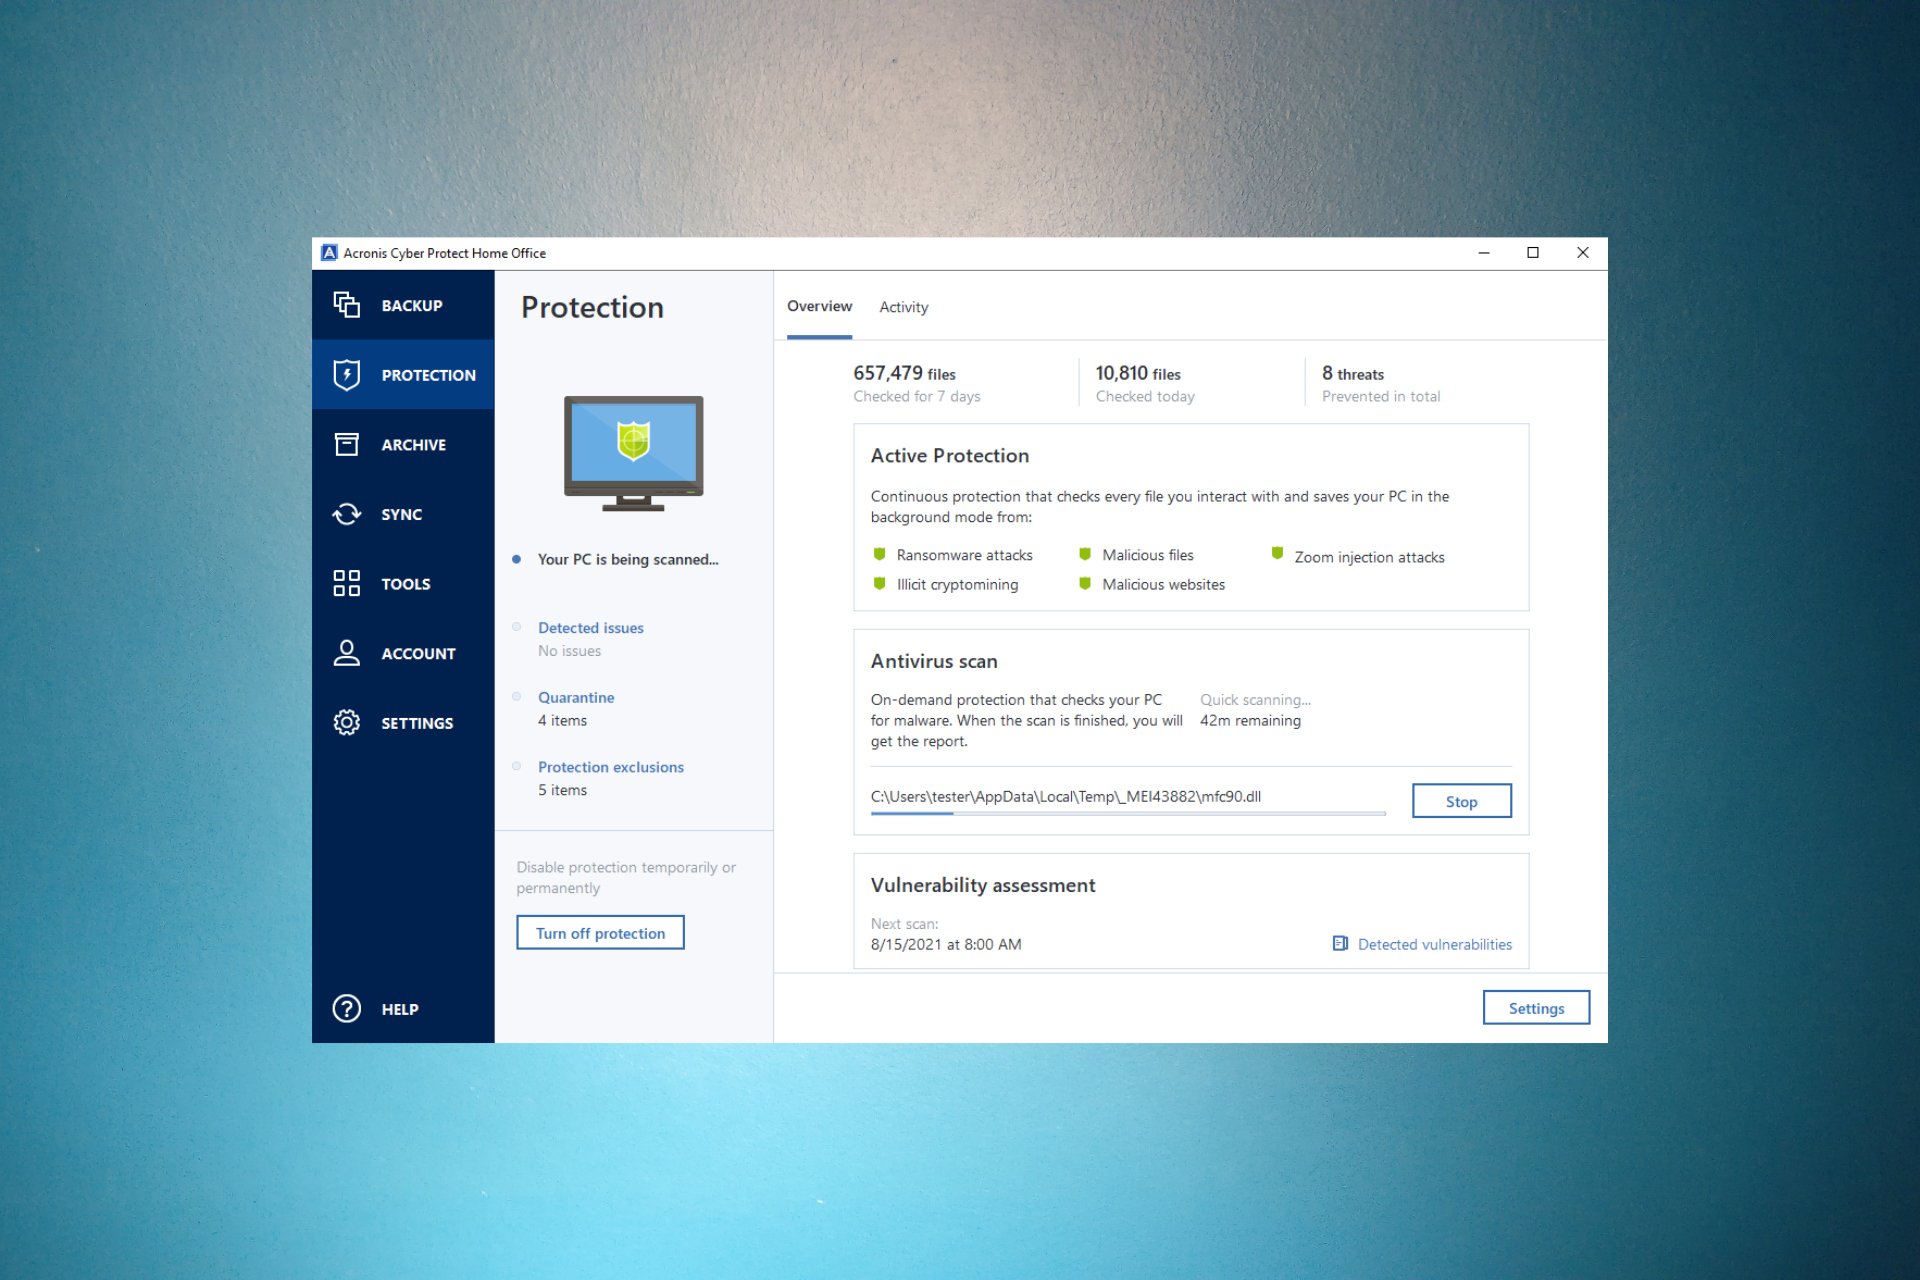 Acronis Cyber Protect Home Office hands on review